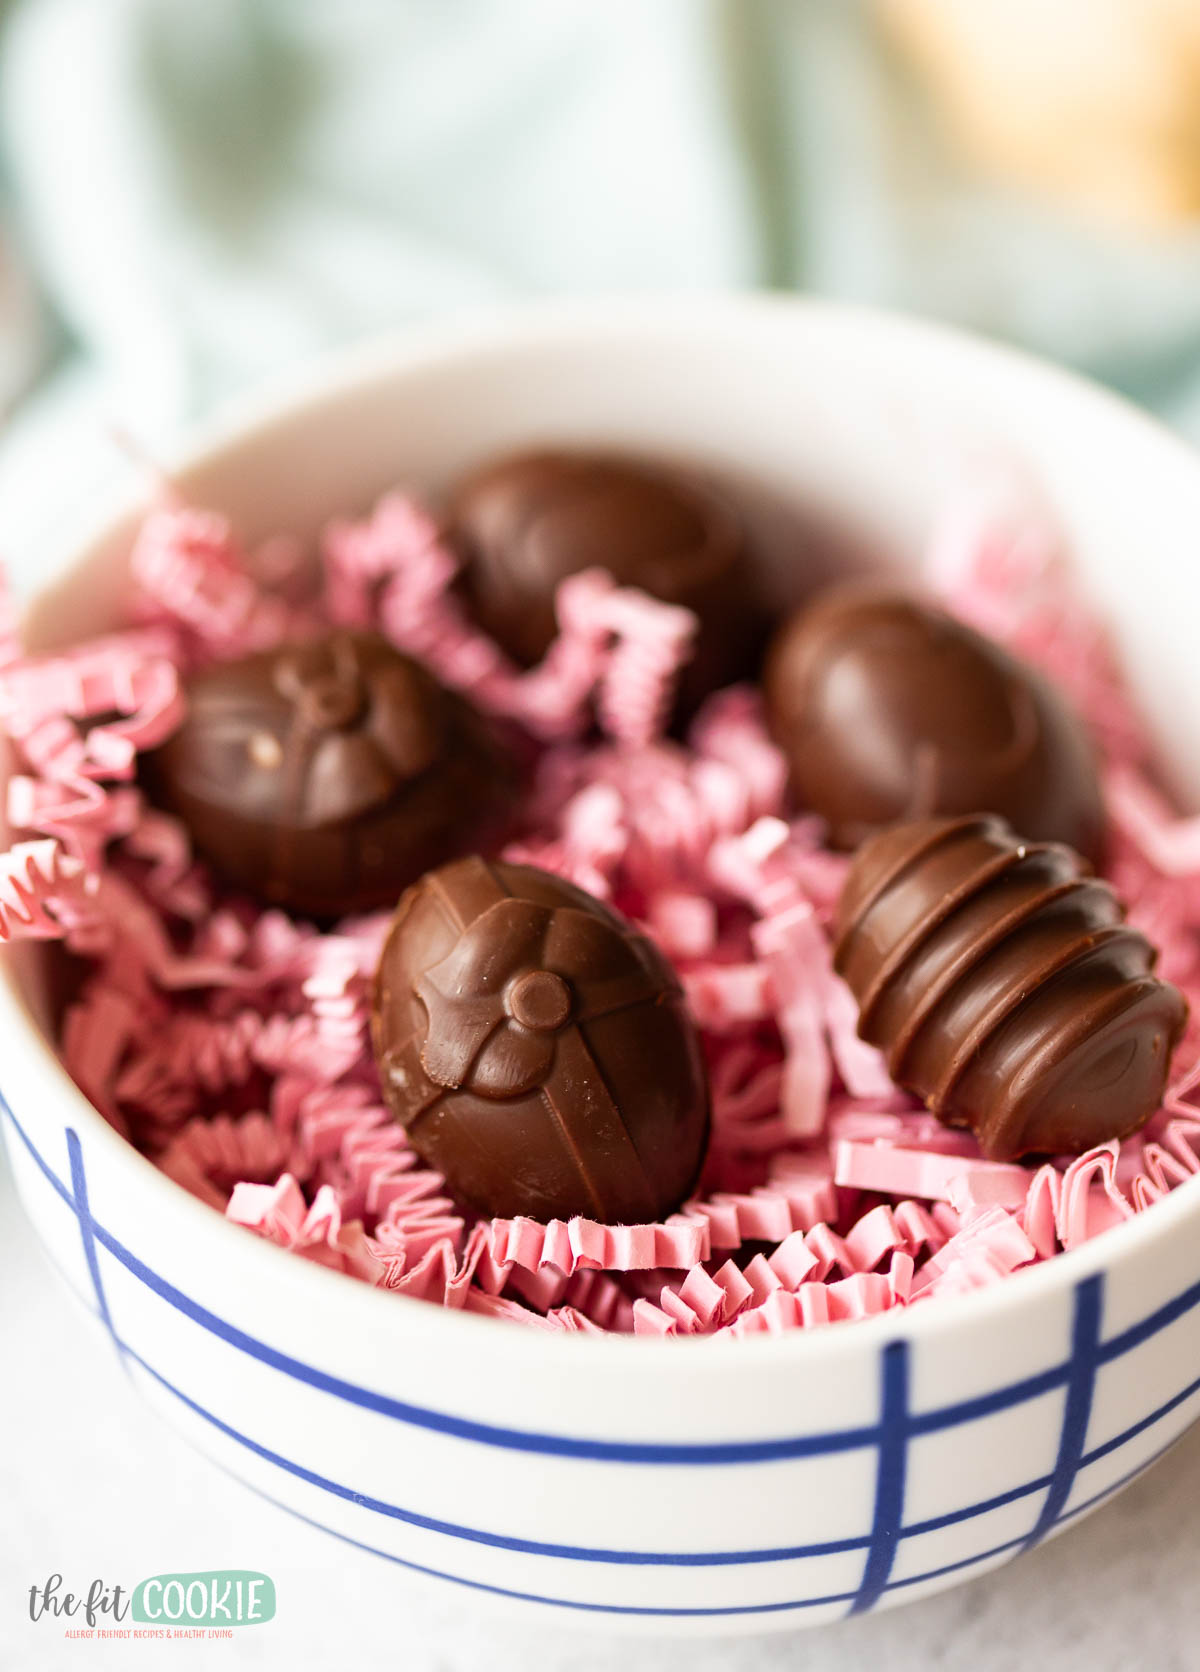 A bowl filled with chocolate cream eggs on pink crinkle paper.